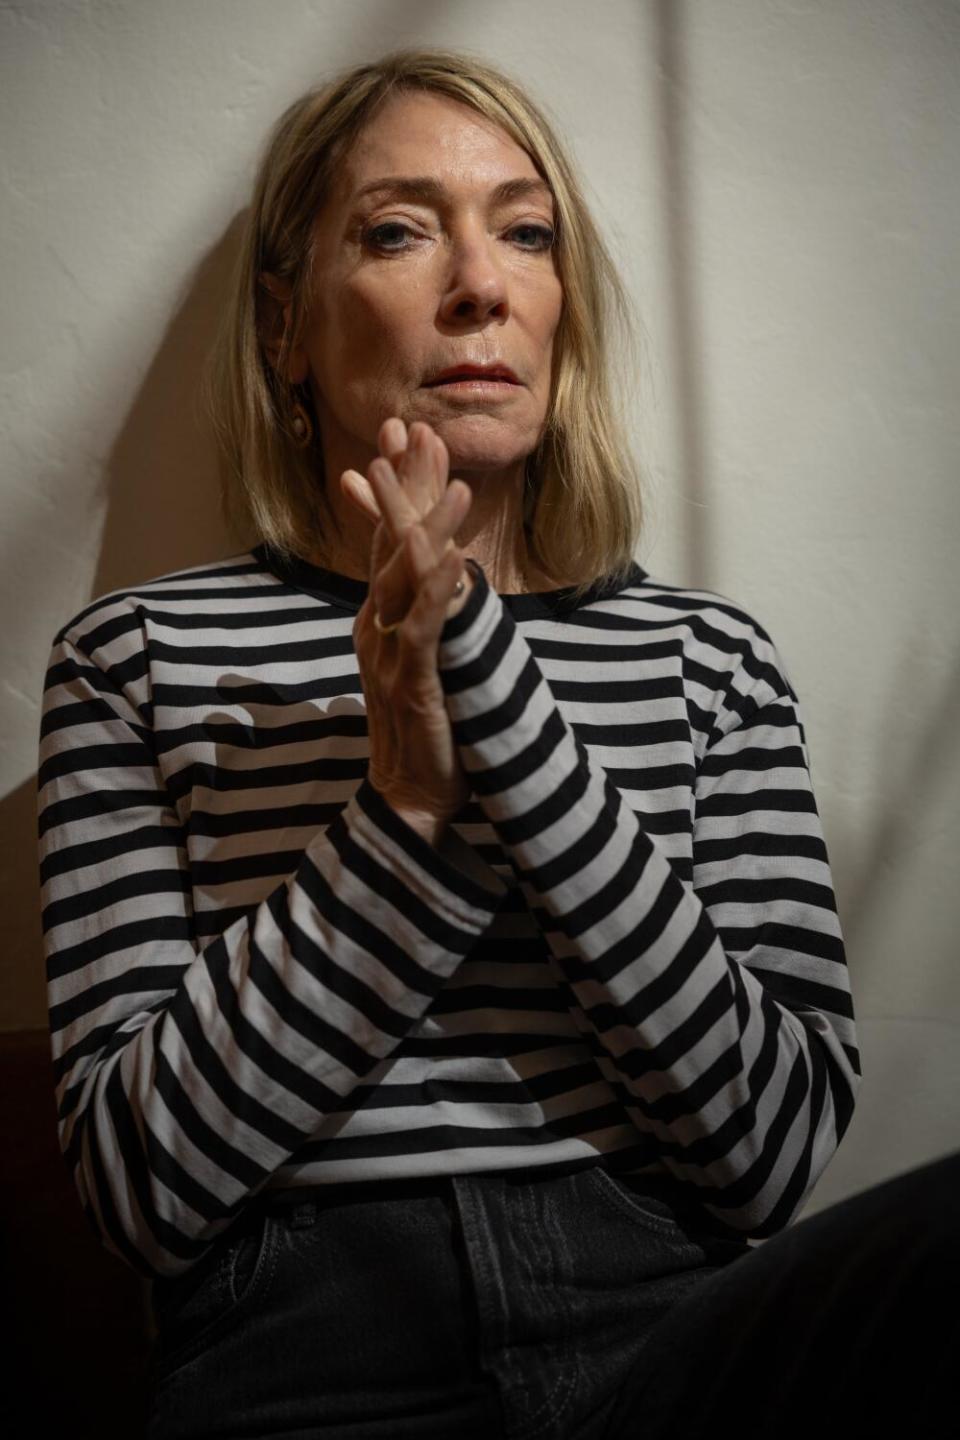 A woman in black and white striped shirt looks directly into the camera.